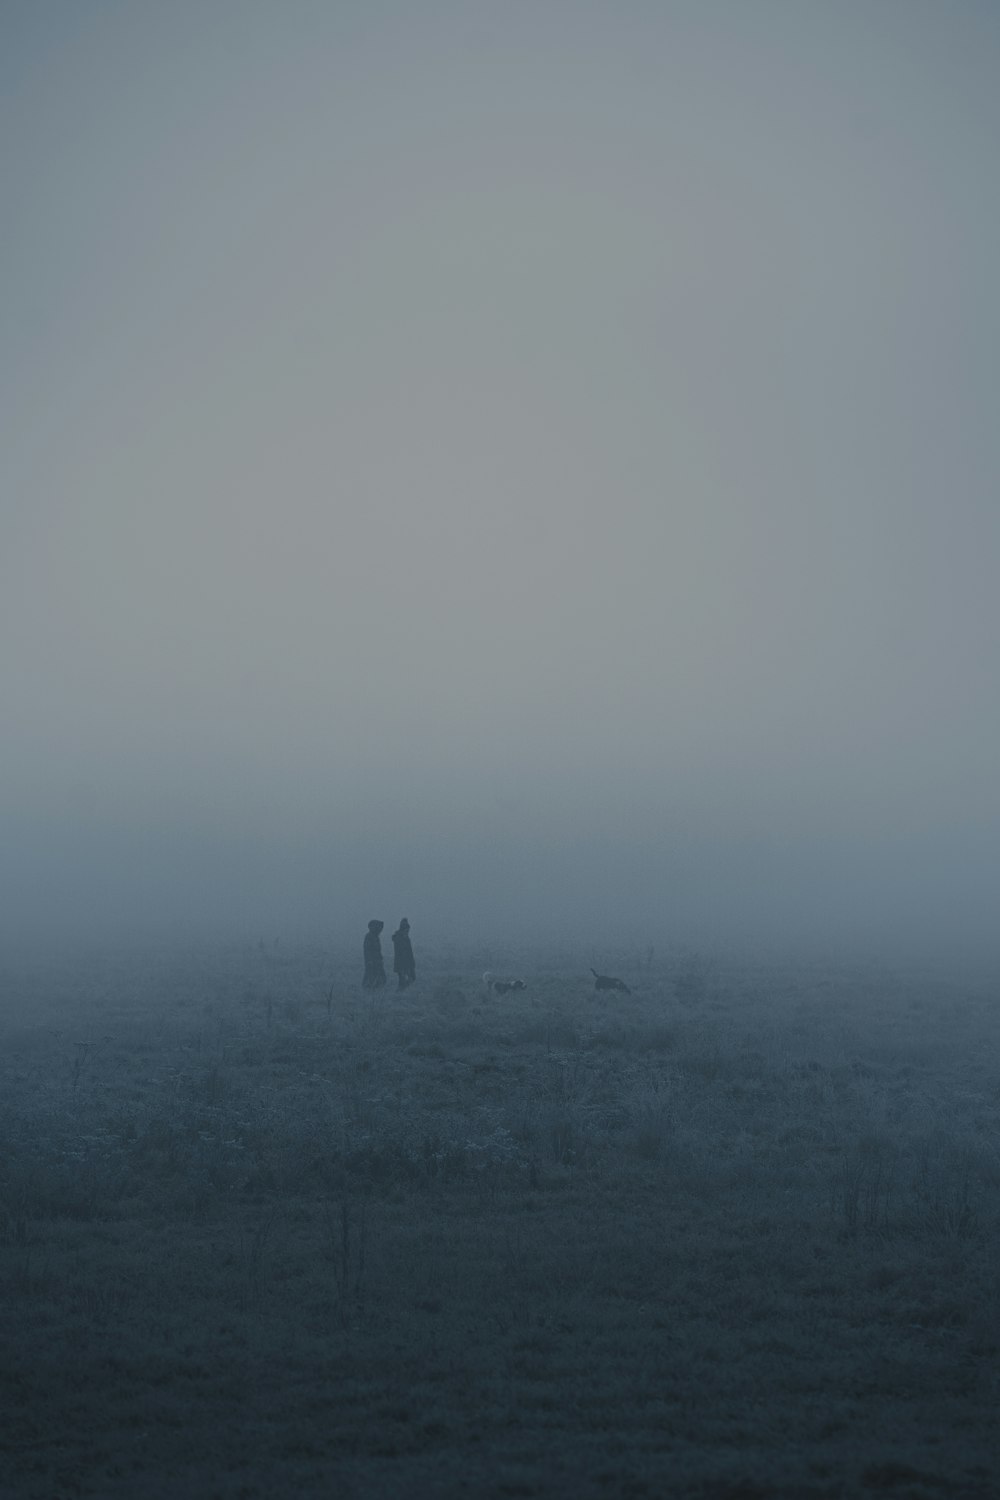 two people standing in a field on a foggy day